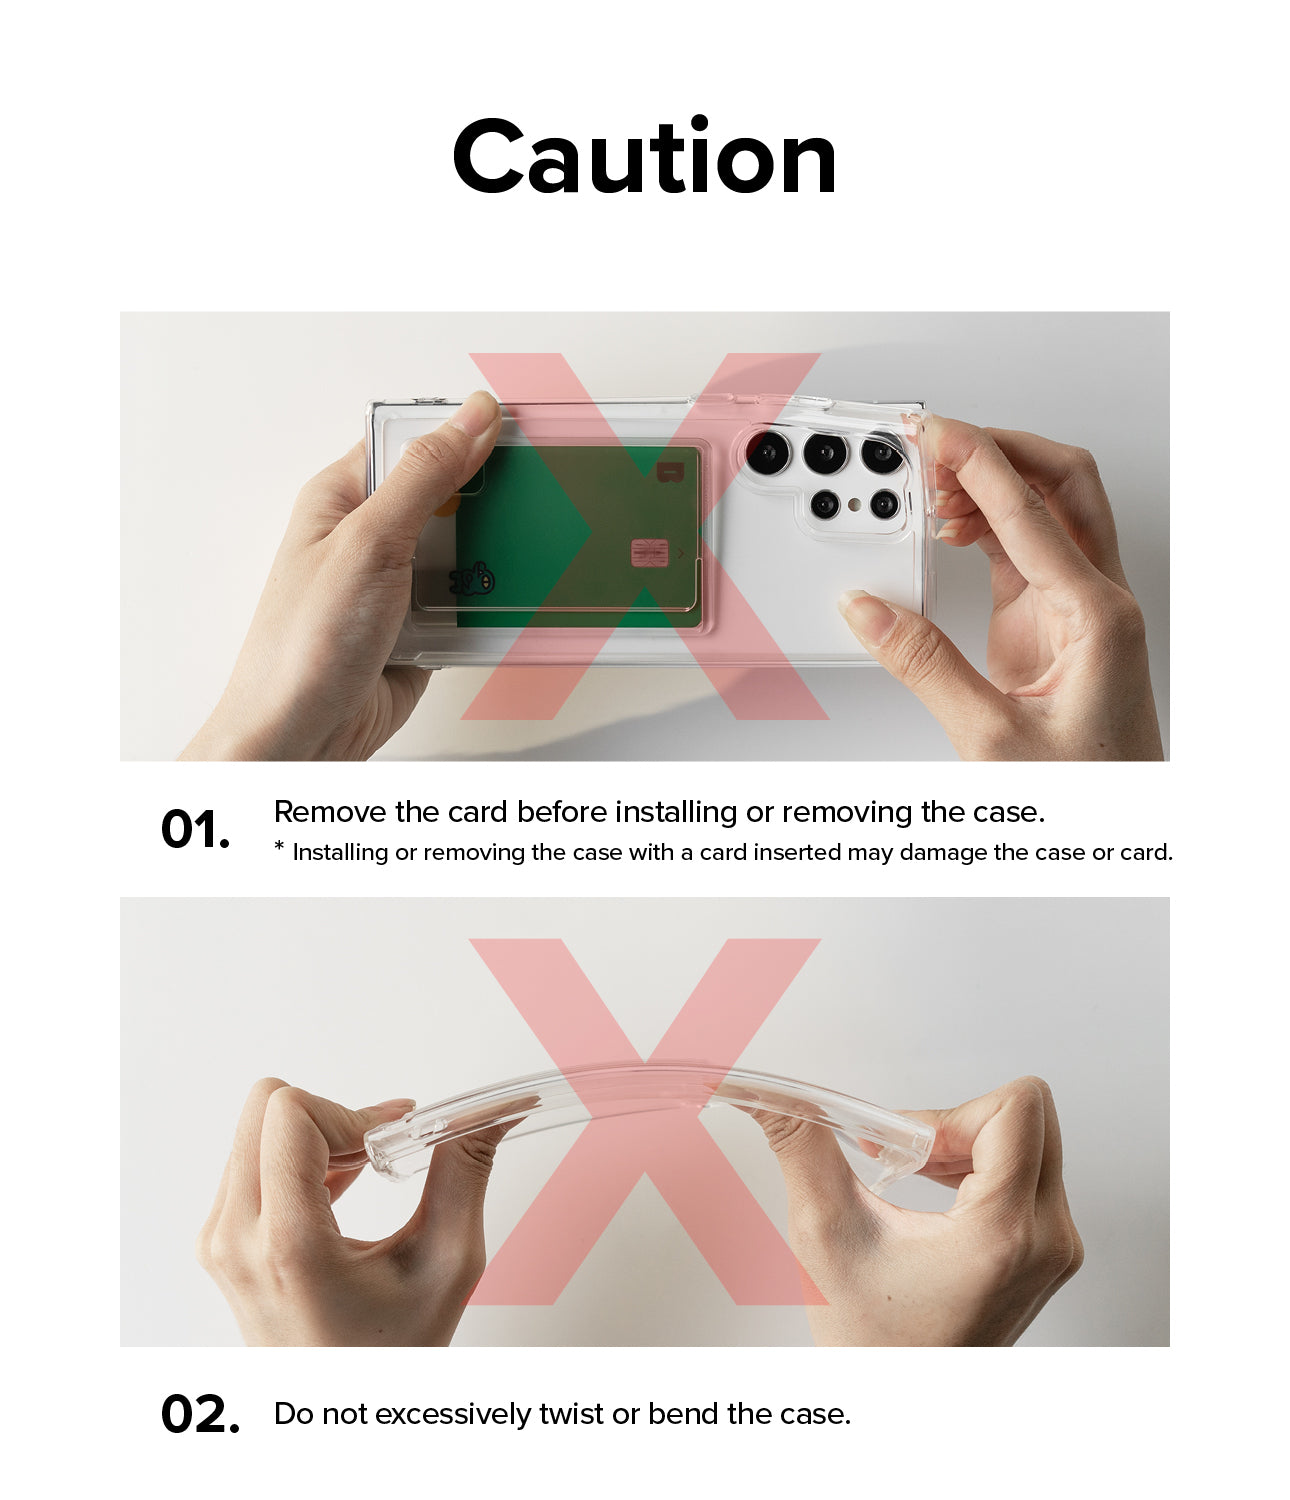 Caution l 01. Remove the card before installing or removing the case. * Installing or removing the case with a care inserted may damage the case or card. 02. Do not excessively twist or bend the case.